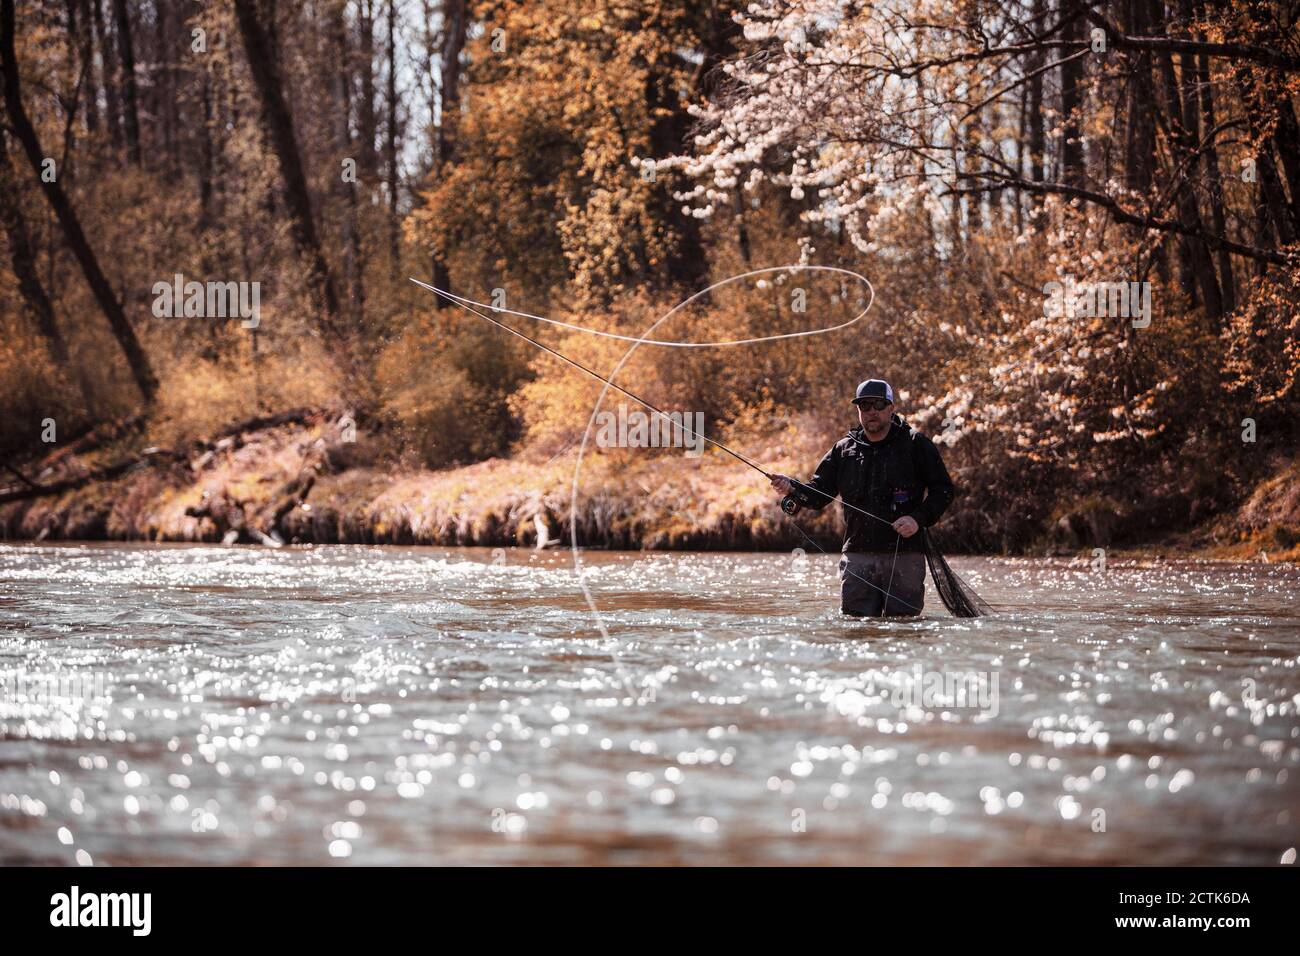 Fly Fisherman casting fishing line while standing in river at forest Stock Photo